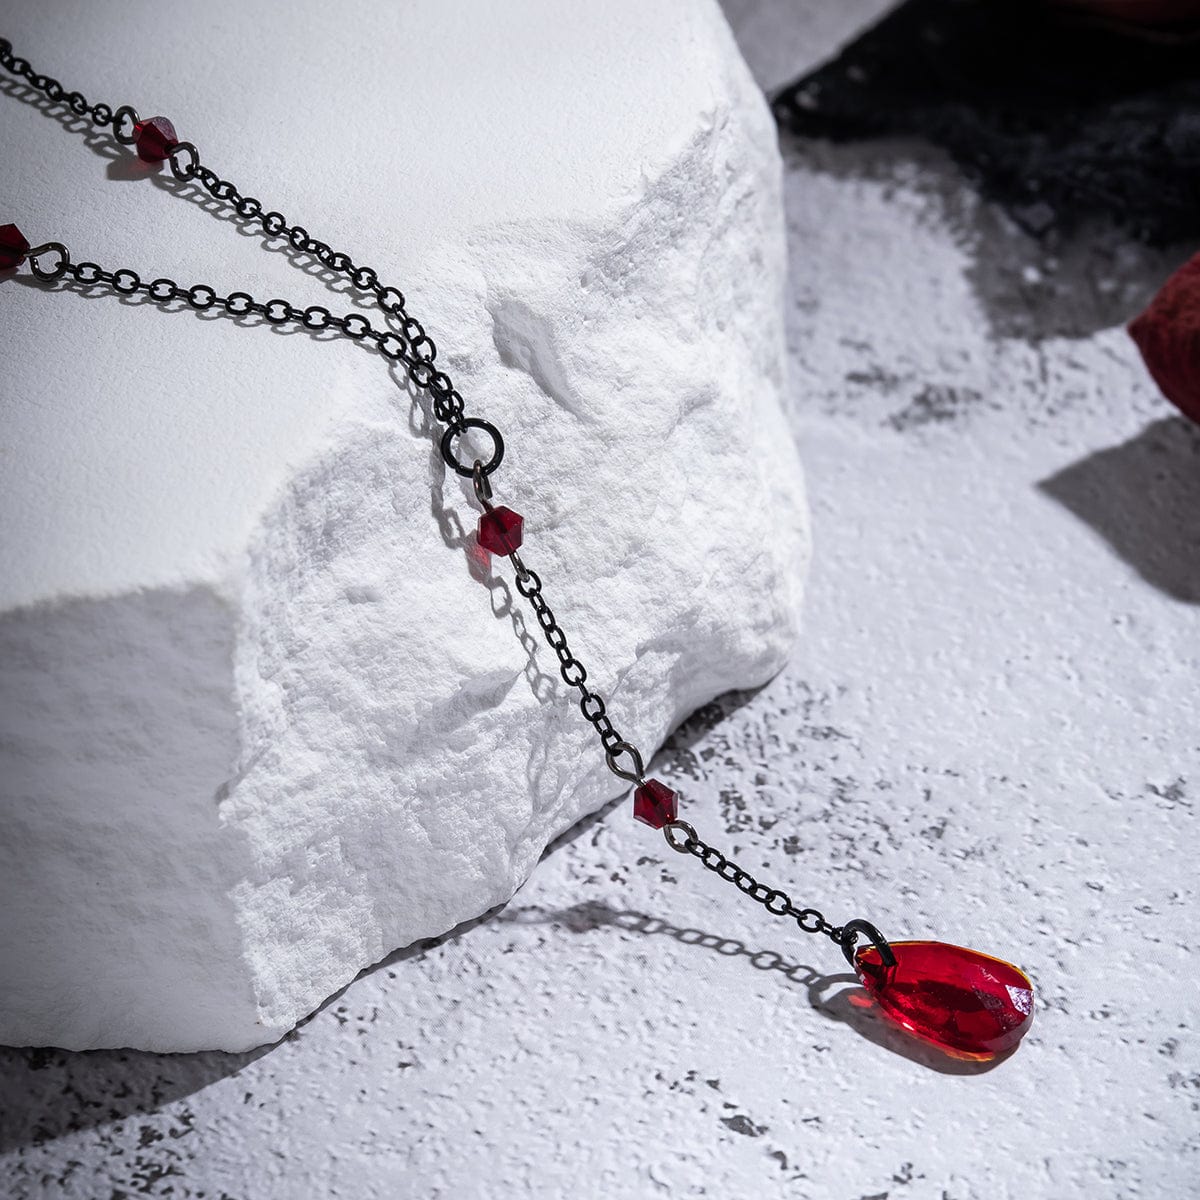 Believe by Brilliance Men's Stainless Steel Gothic Red Crystal Claw Pendant  Necklace - Walmart.com